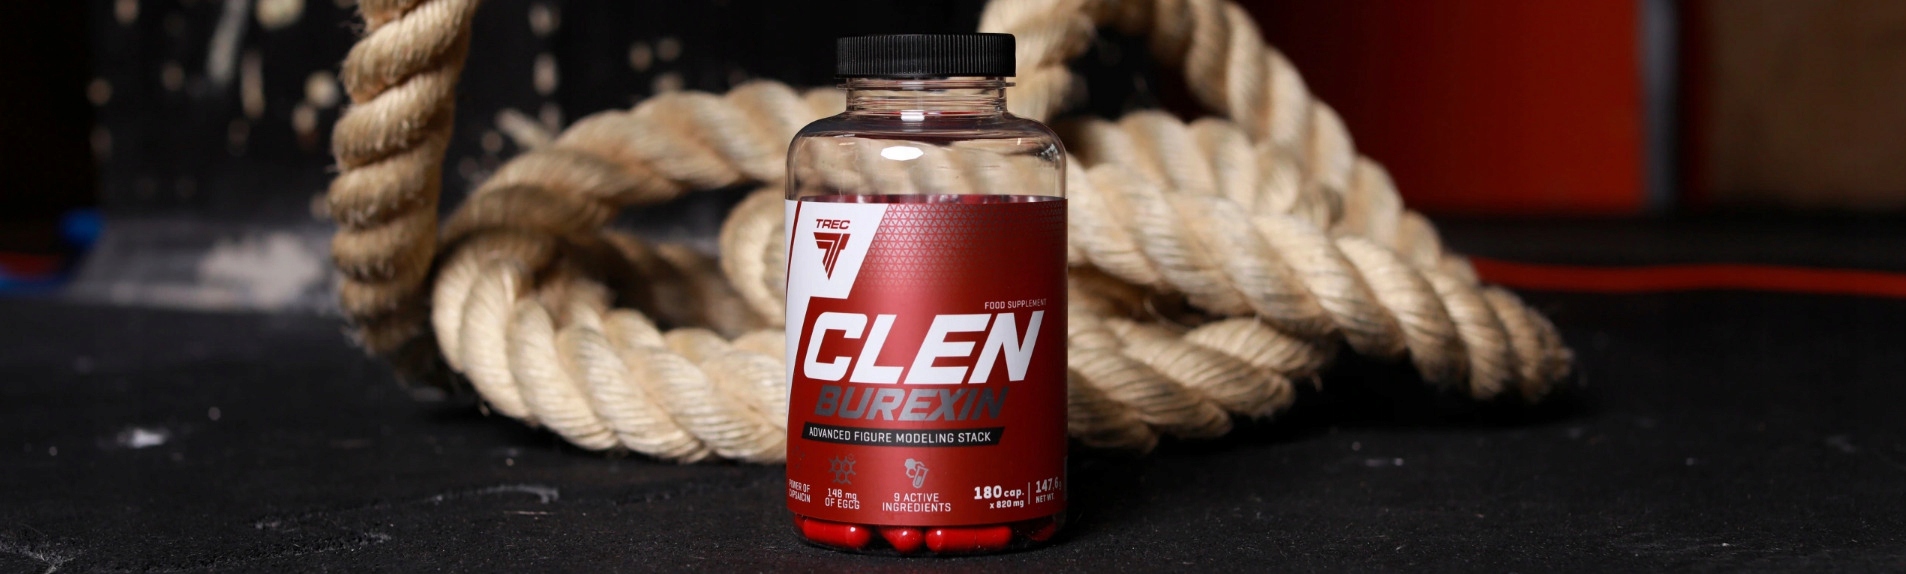 thermo fat burner czy clenburexin